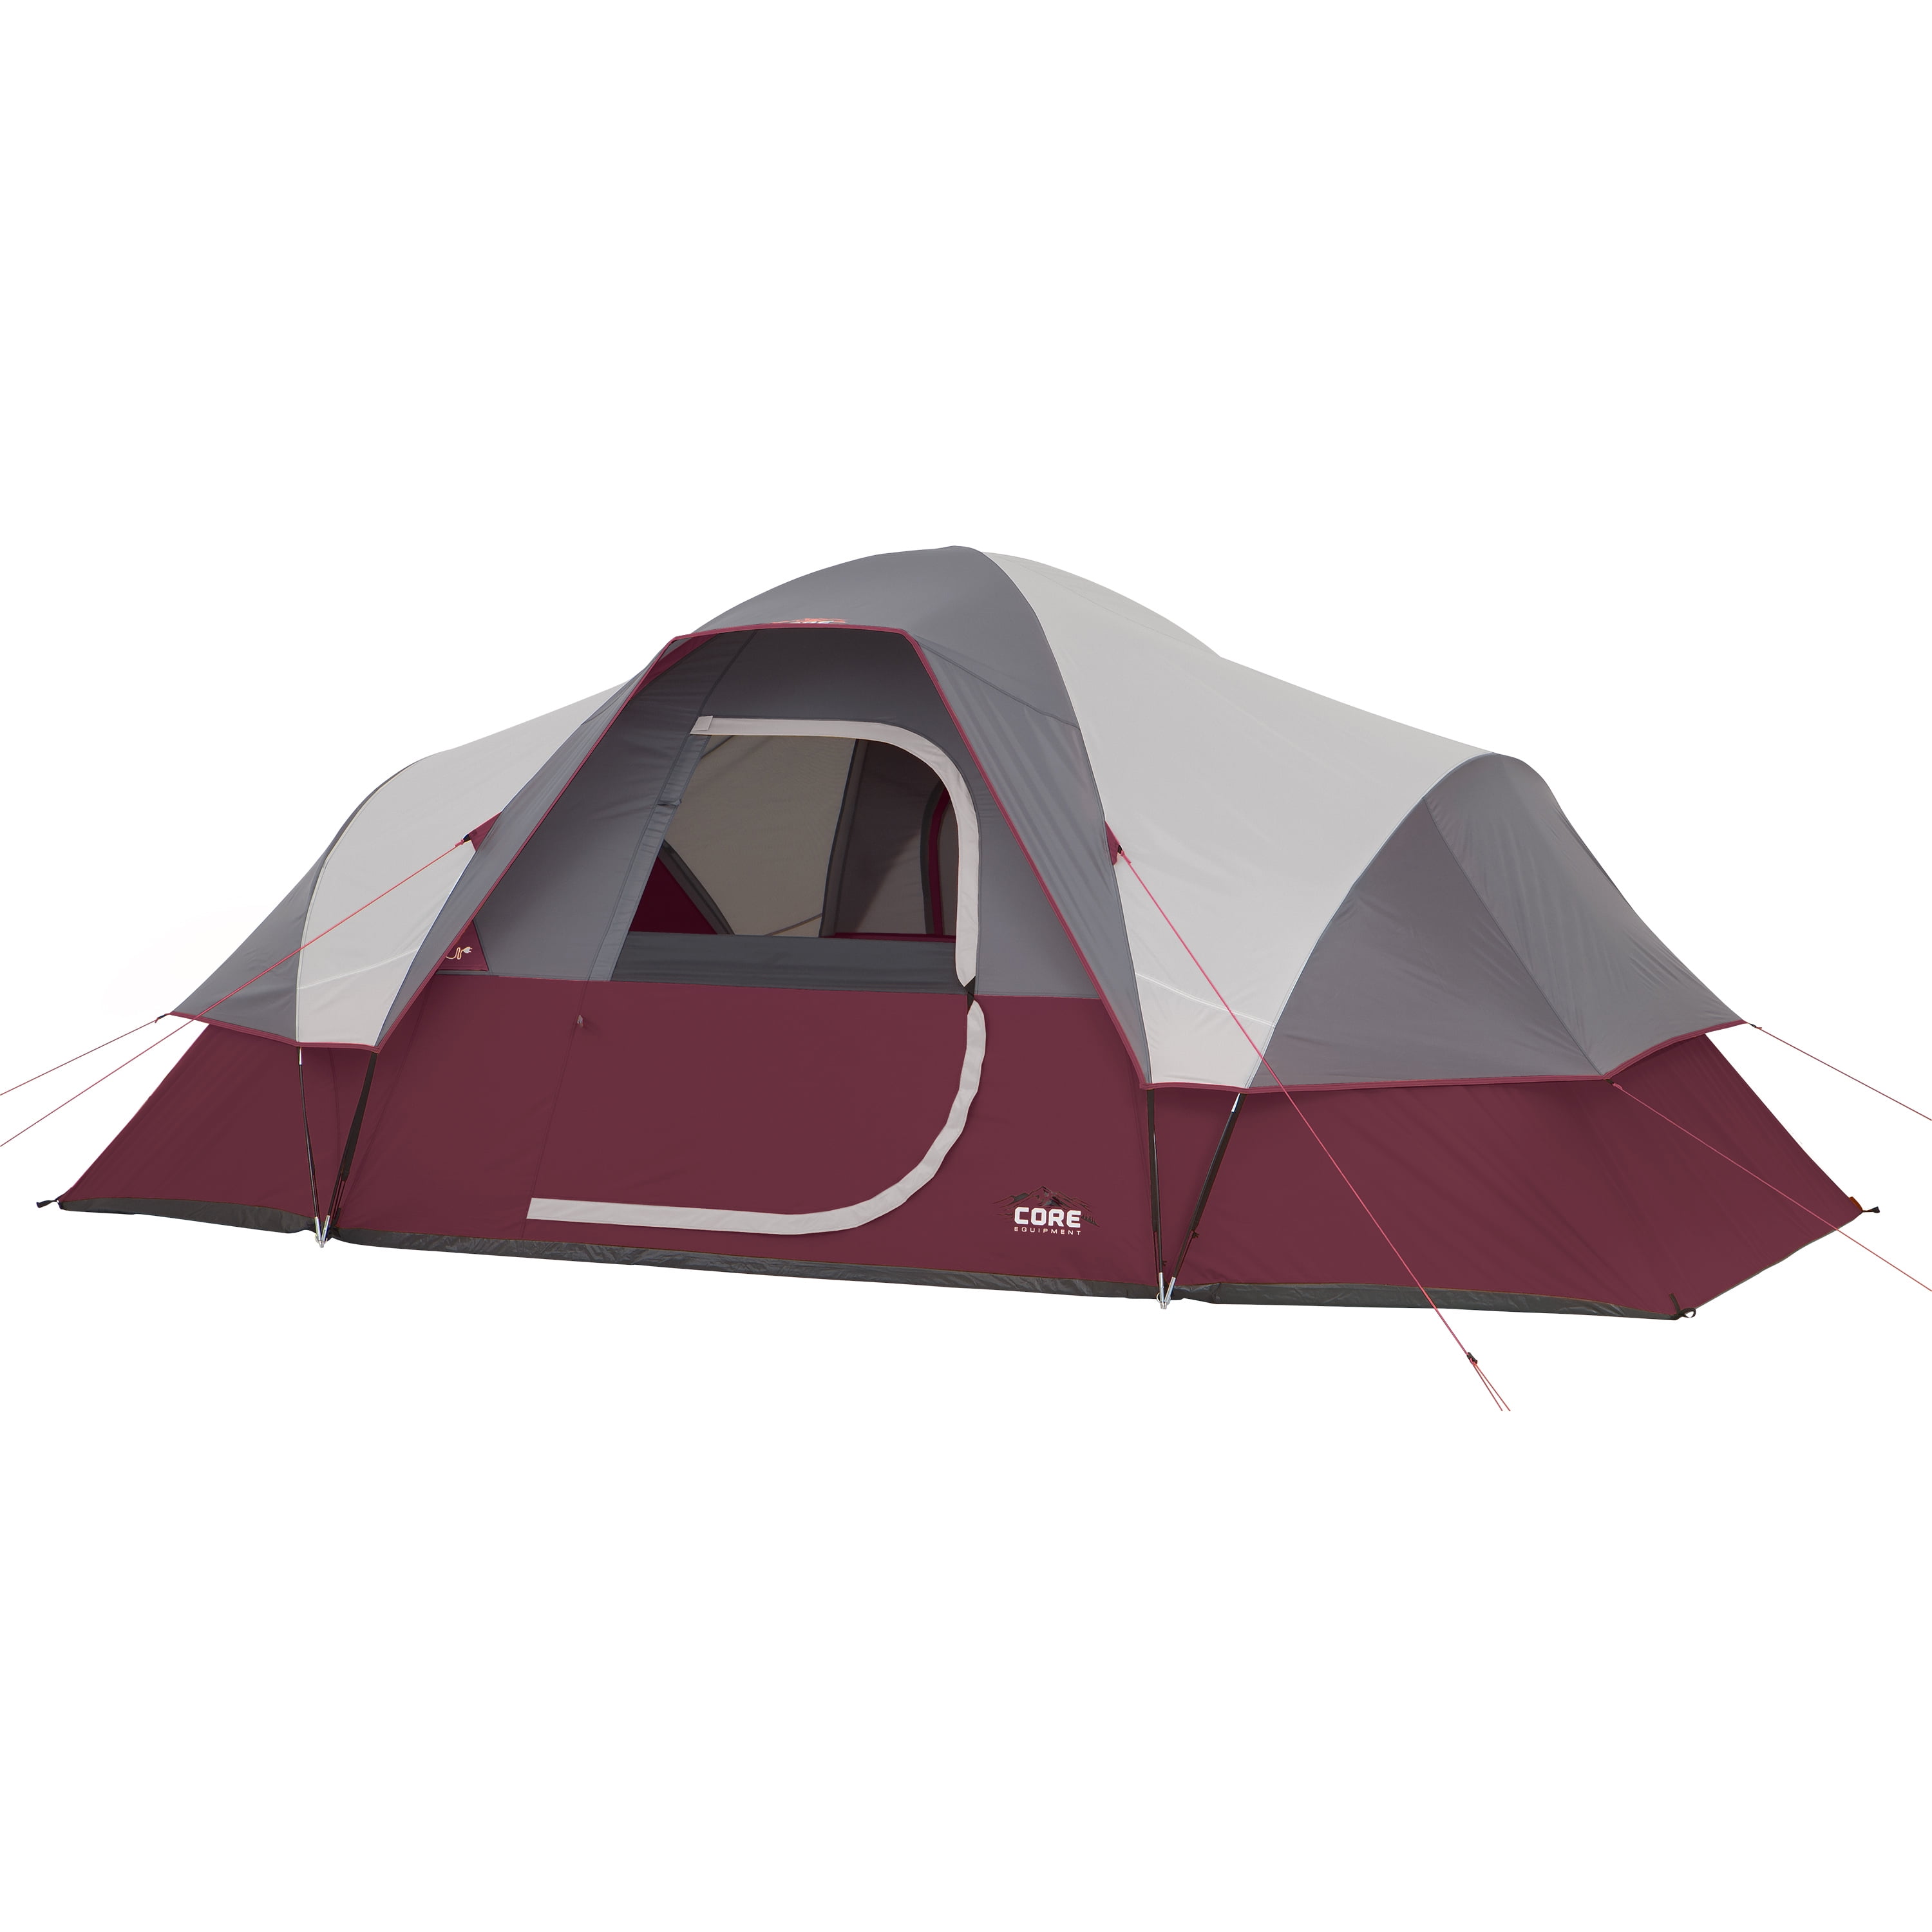 CORE Extended Dome Tent 16 x 9 Foot 9 Person Camping Tent w/ Air Vents, Red